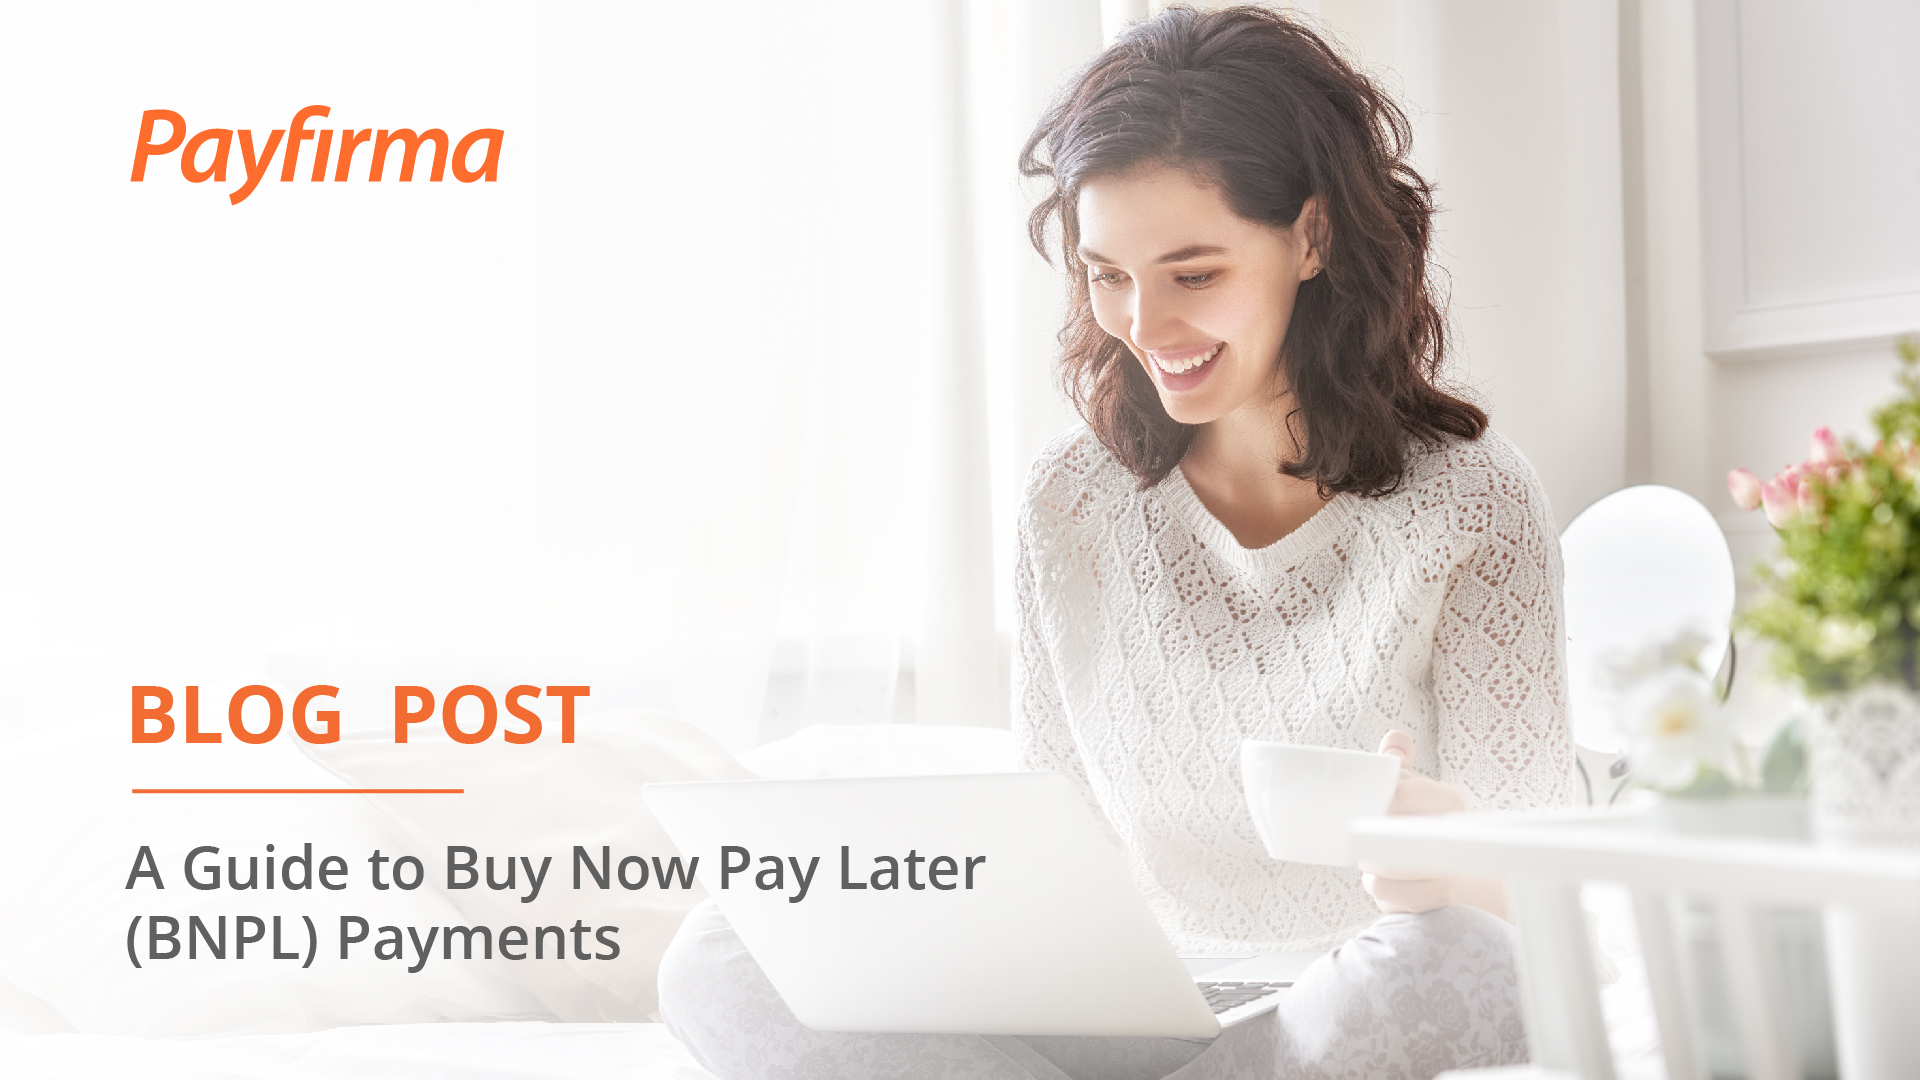 A Guide to Buy Now Pay Later (BNPL) Payments - Payfirma